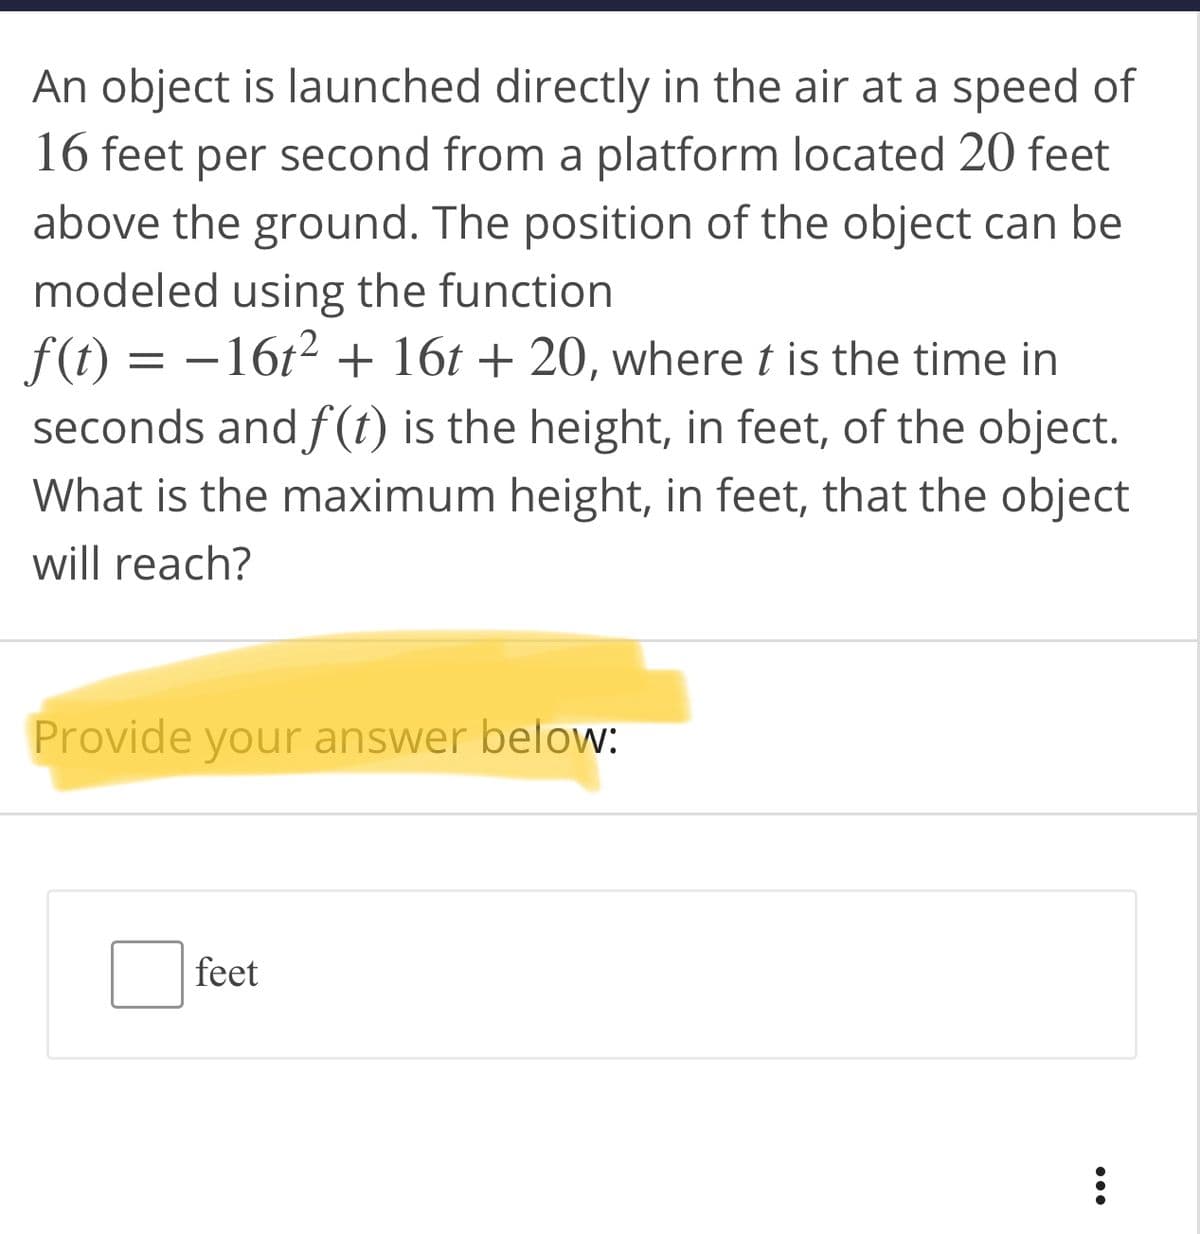 An object is launched directly in the air at a speed of
16 feet per second from a platform located 20 feet
above the ground. The position of the object can be
modeled using the function
f(t) = –16t2 + 16t + 20, where t is the time in
seconds and f(t) is the height, in feet, of the object.
What is the maximum height, in feet, that the object
-
will reach?
Provide your answer below:
feet
